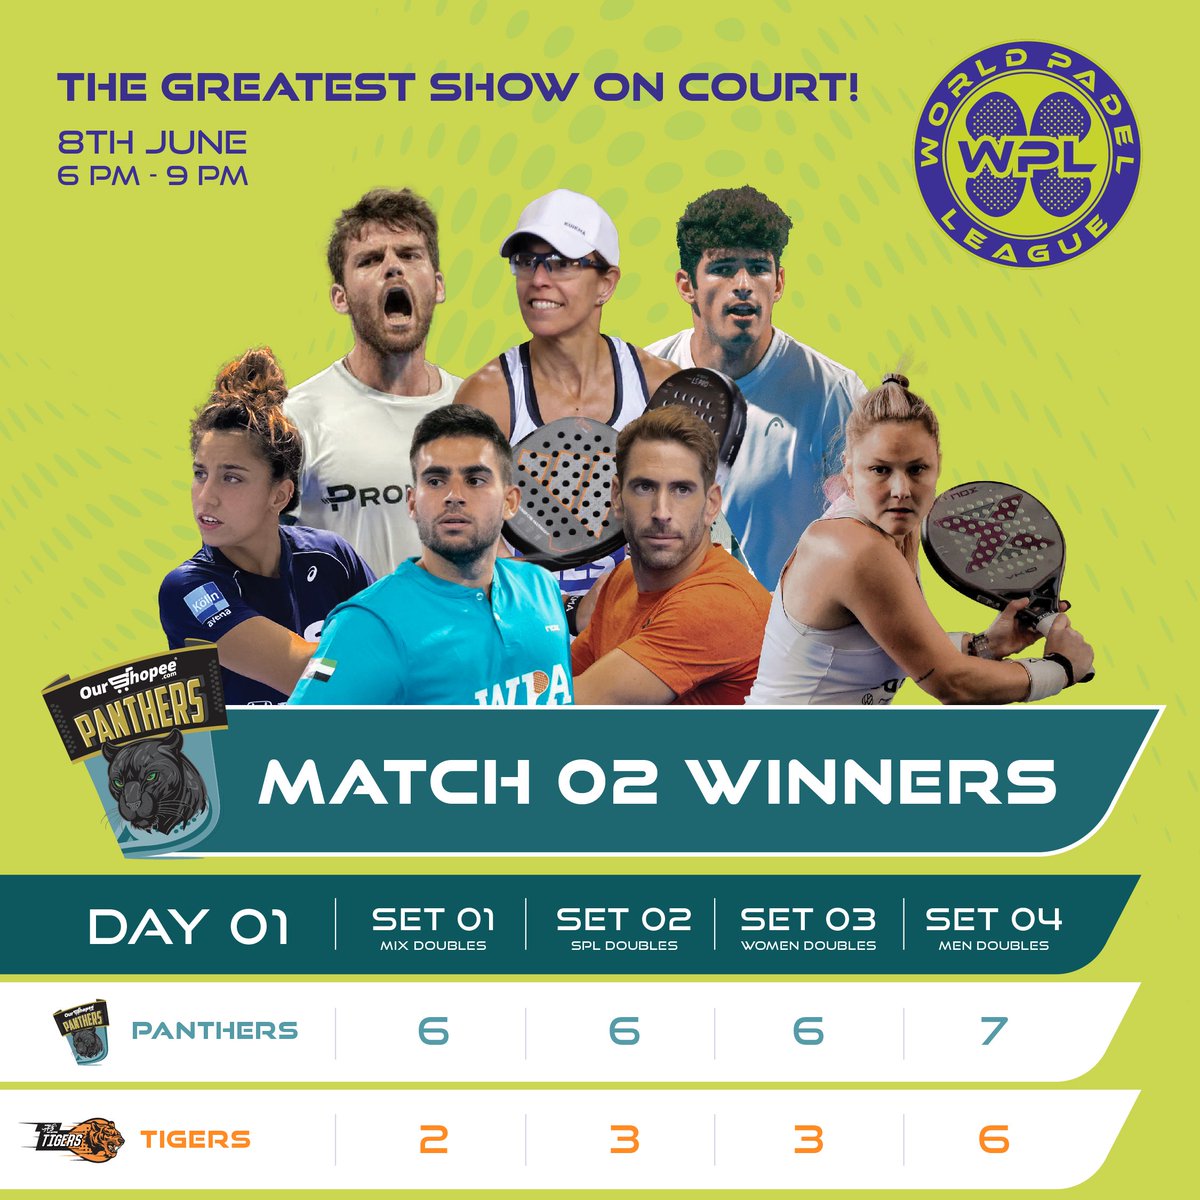 Wrapping up the day like true champions! 
Congratulations to Team Panthers. 

#thegreatestshowoncourt 

#wplworld #worldpadelleague #CocaColaArena #thegreatestshowoncourt
#dubaisc #dubaidet #dubai #UAE #history #WTL
#padelsport #sports #news#padel #padeltime